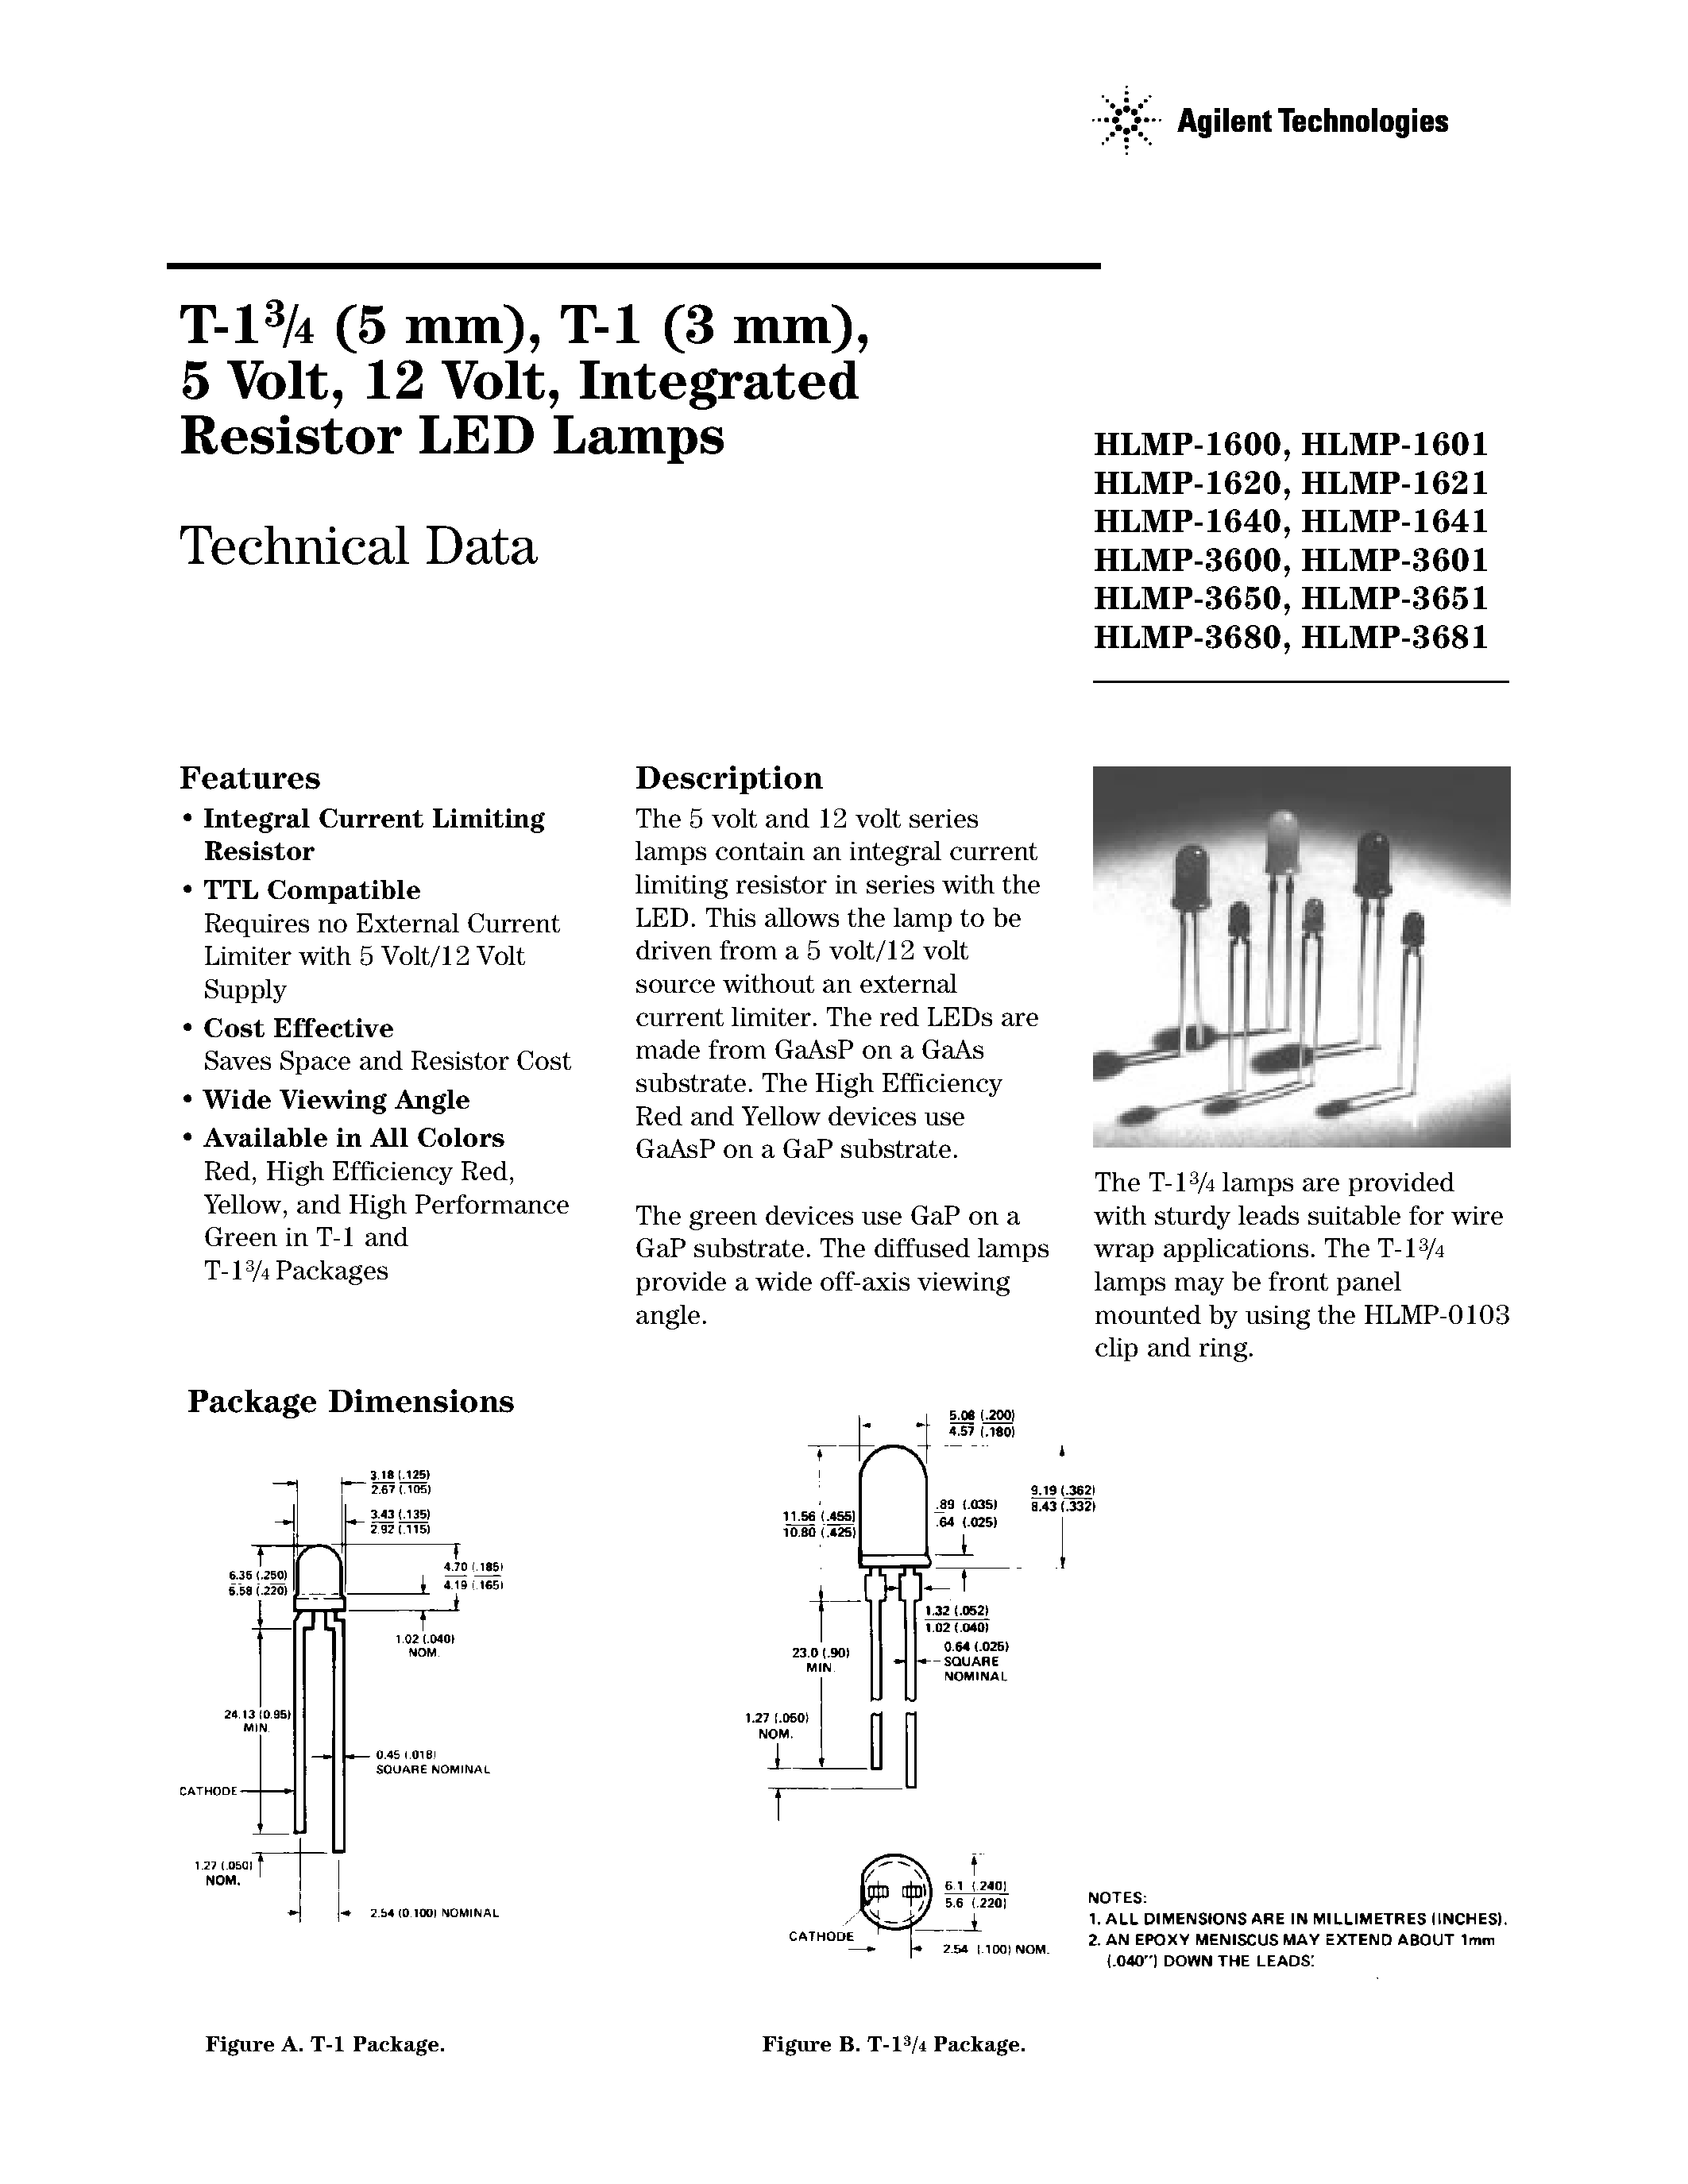 Datasheet HLMP-16xx - Integrated Resistor LED Lamps page 1